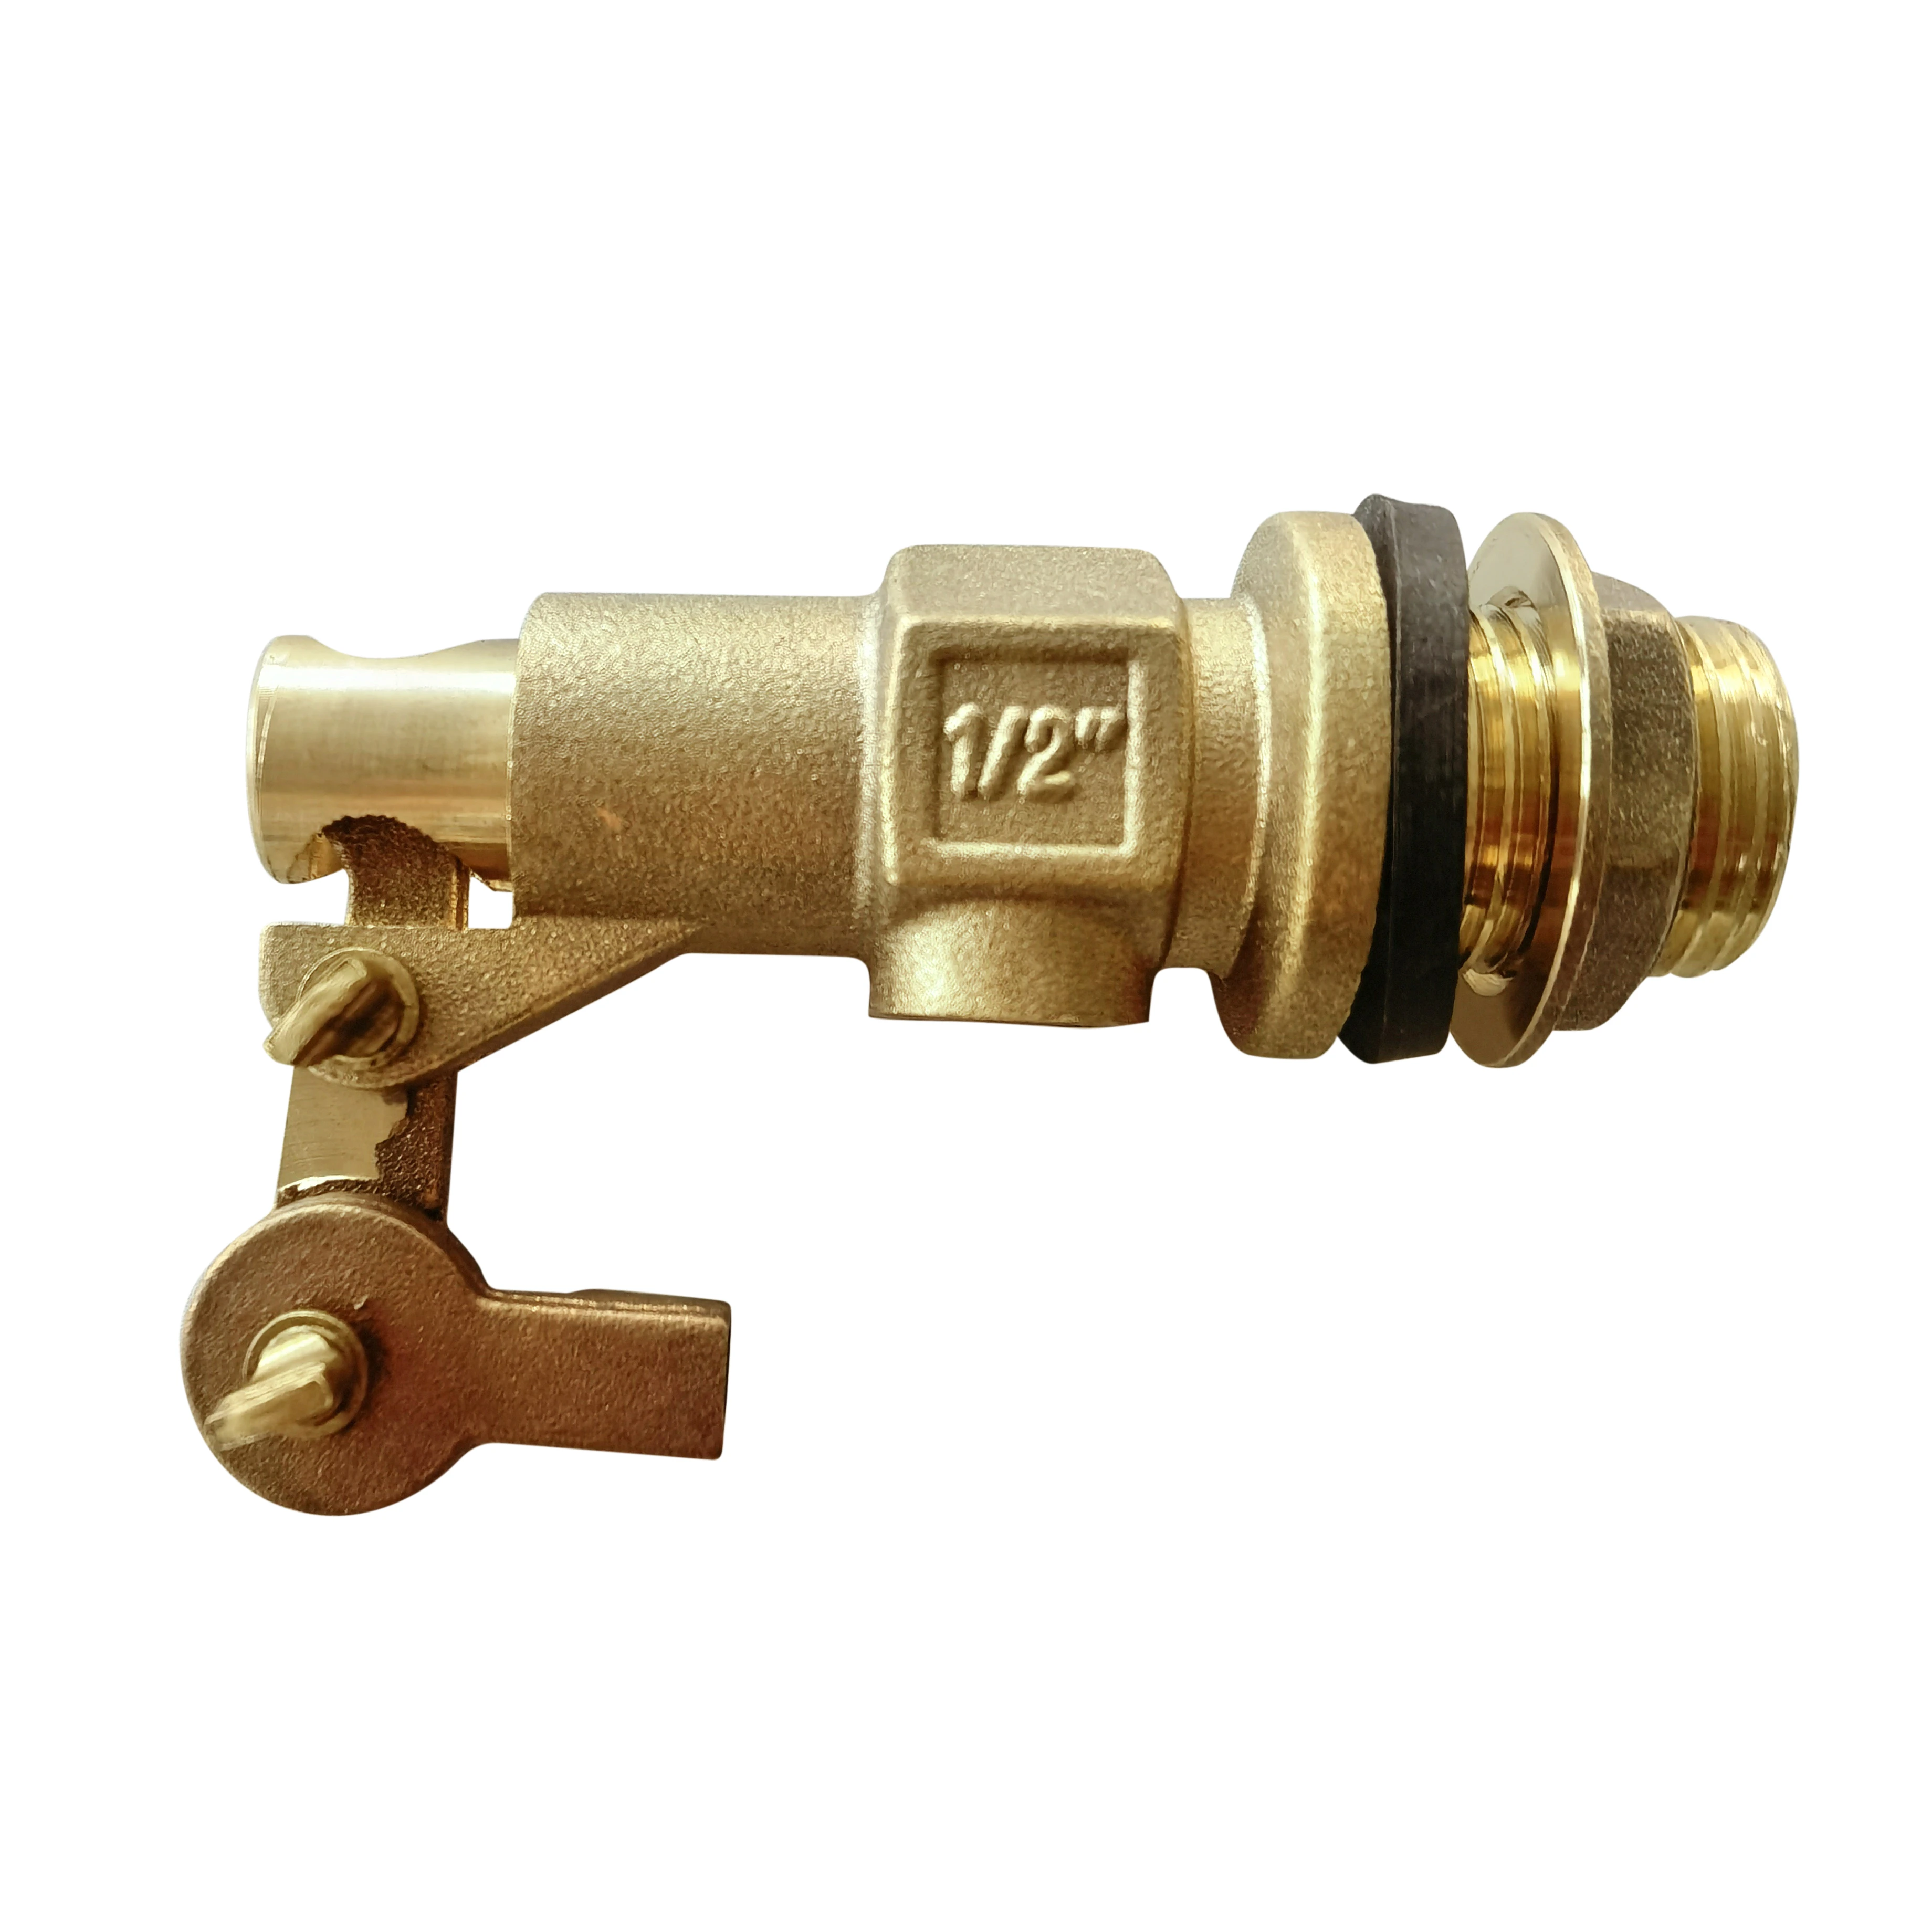 Brass Water Tank Male Thread Float Floating Ball Valve Control 100 Manual General Dn15 Dn20 Standard Packing or Customized